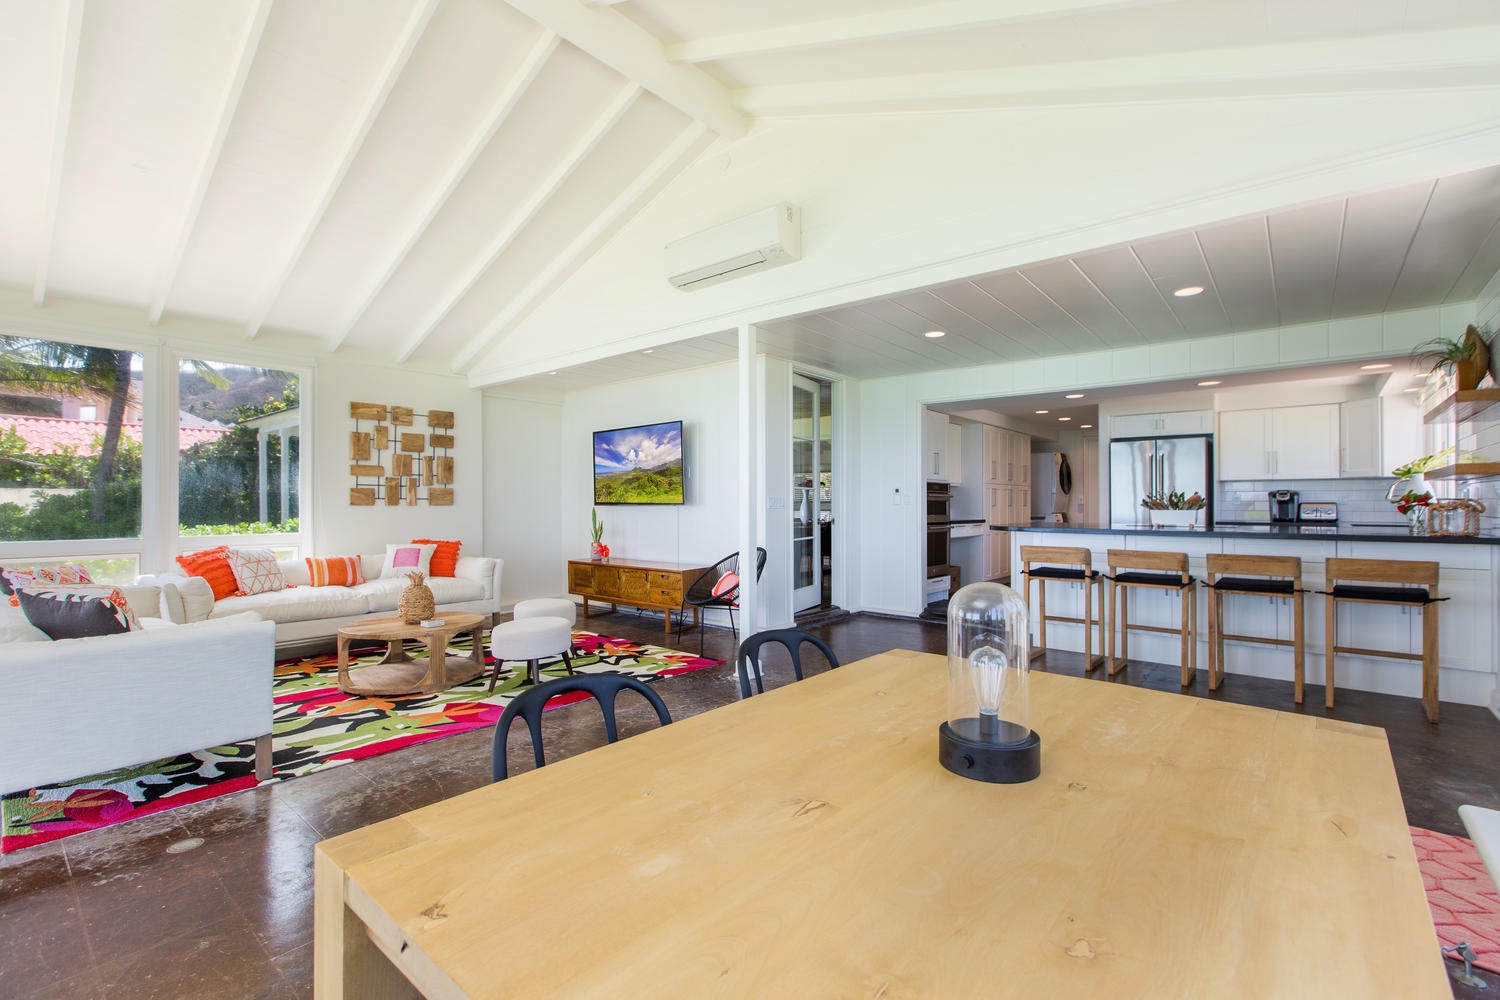 Kailua Vacation Rentals, Lanikai Oceanside 4 Bedroom - Family/living room and kitchen.